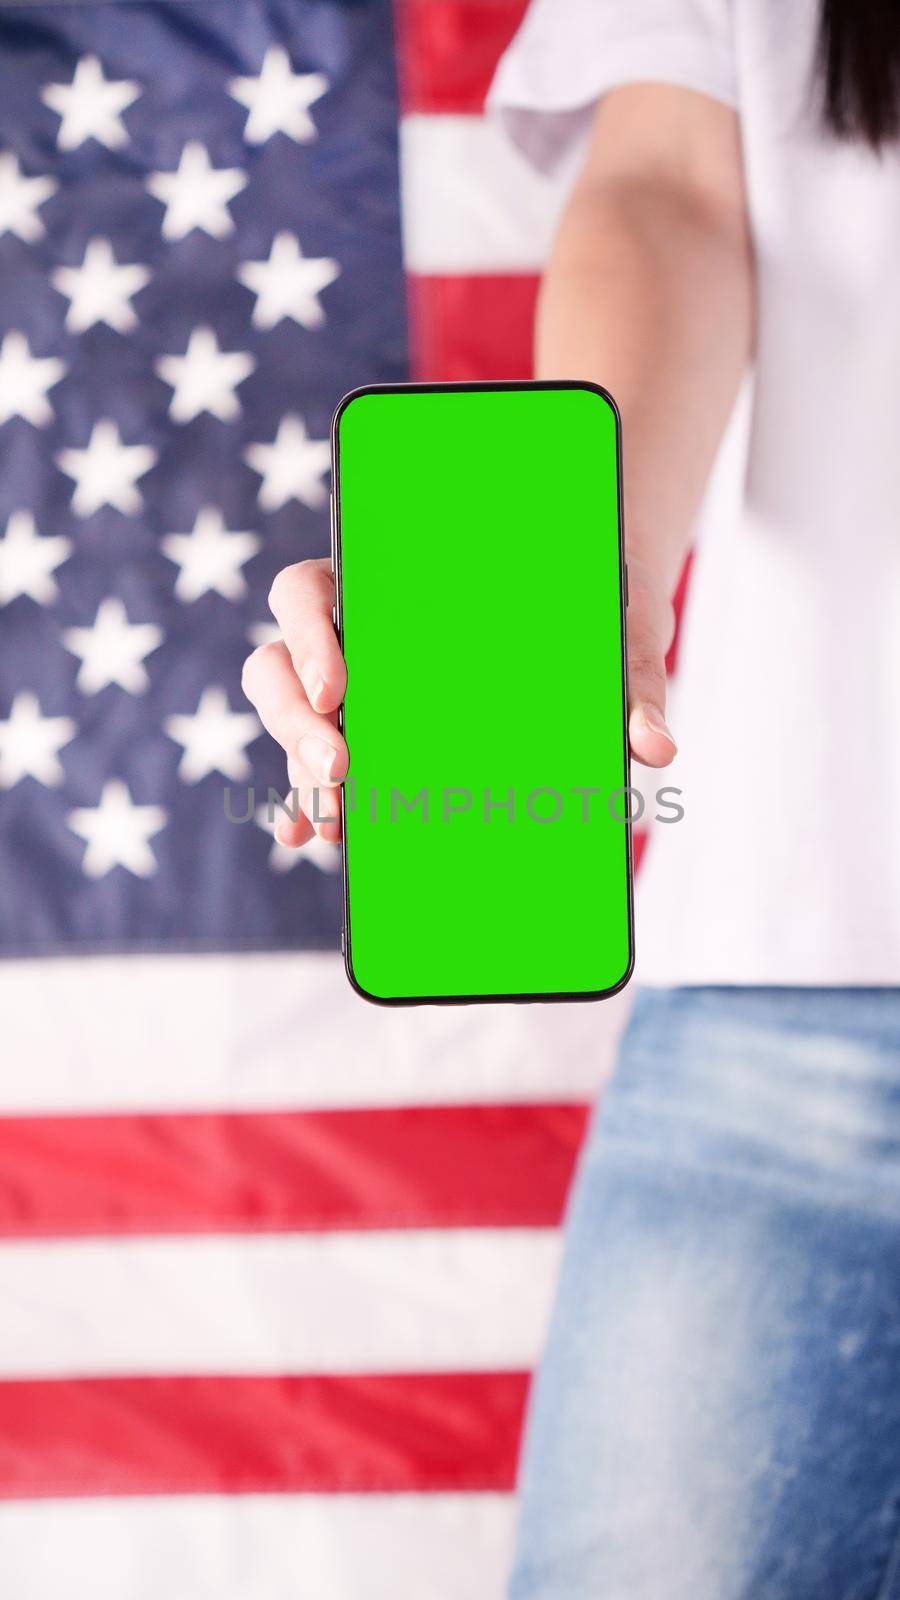 Hand holding mobile phone with green screen United states of America flag on background. Mockup phone. Labor day, 4th of July, Memorial day, 9.11. by JuliaDorian